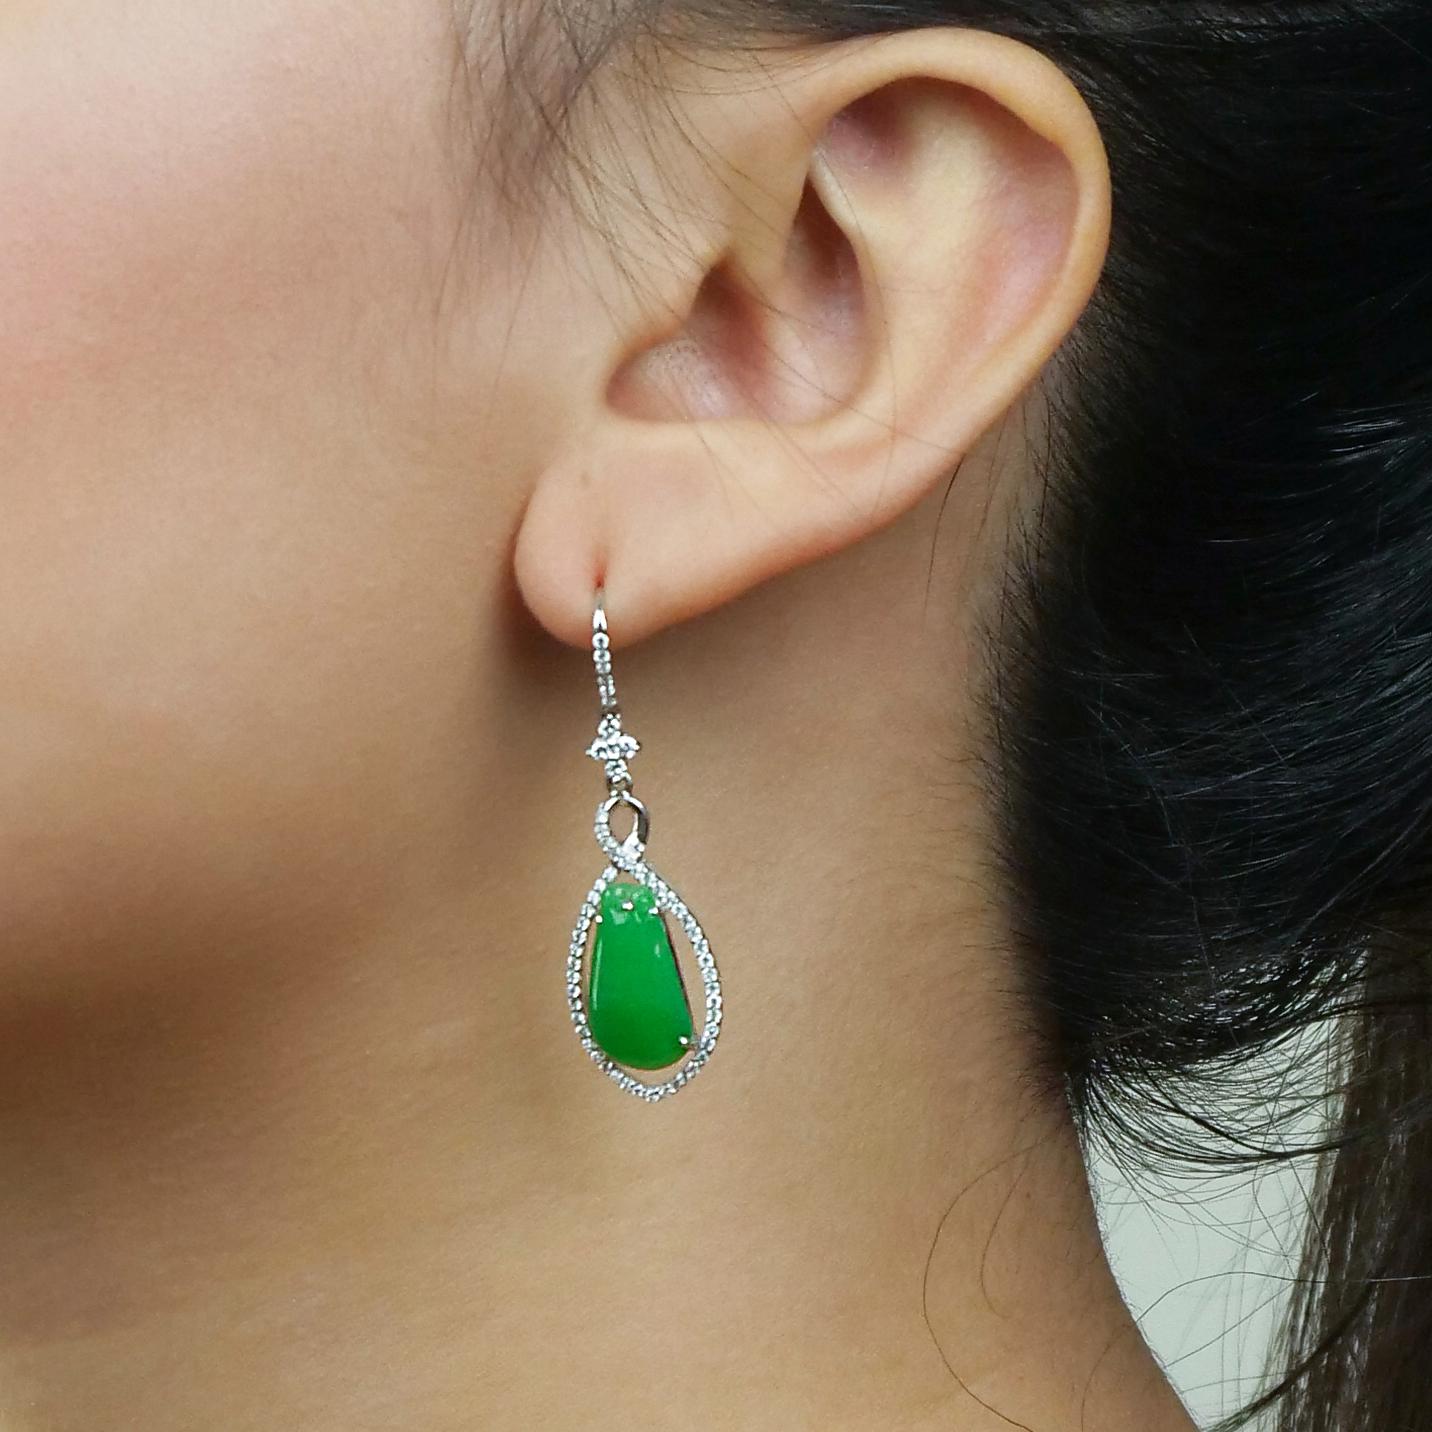 Stunning jade earrings in pear shape dangled by various shapes of crosses, circles and vertical lines all covered in glistening diamonds. The jade is calm and cooling and has a gorgeous sheer glowing sheen on it as well as subtle shades of greens.